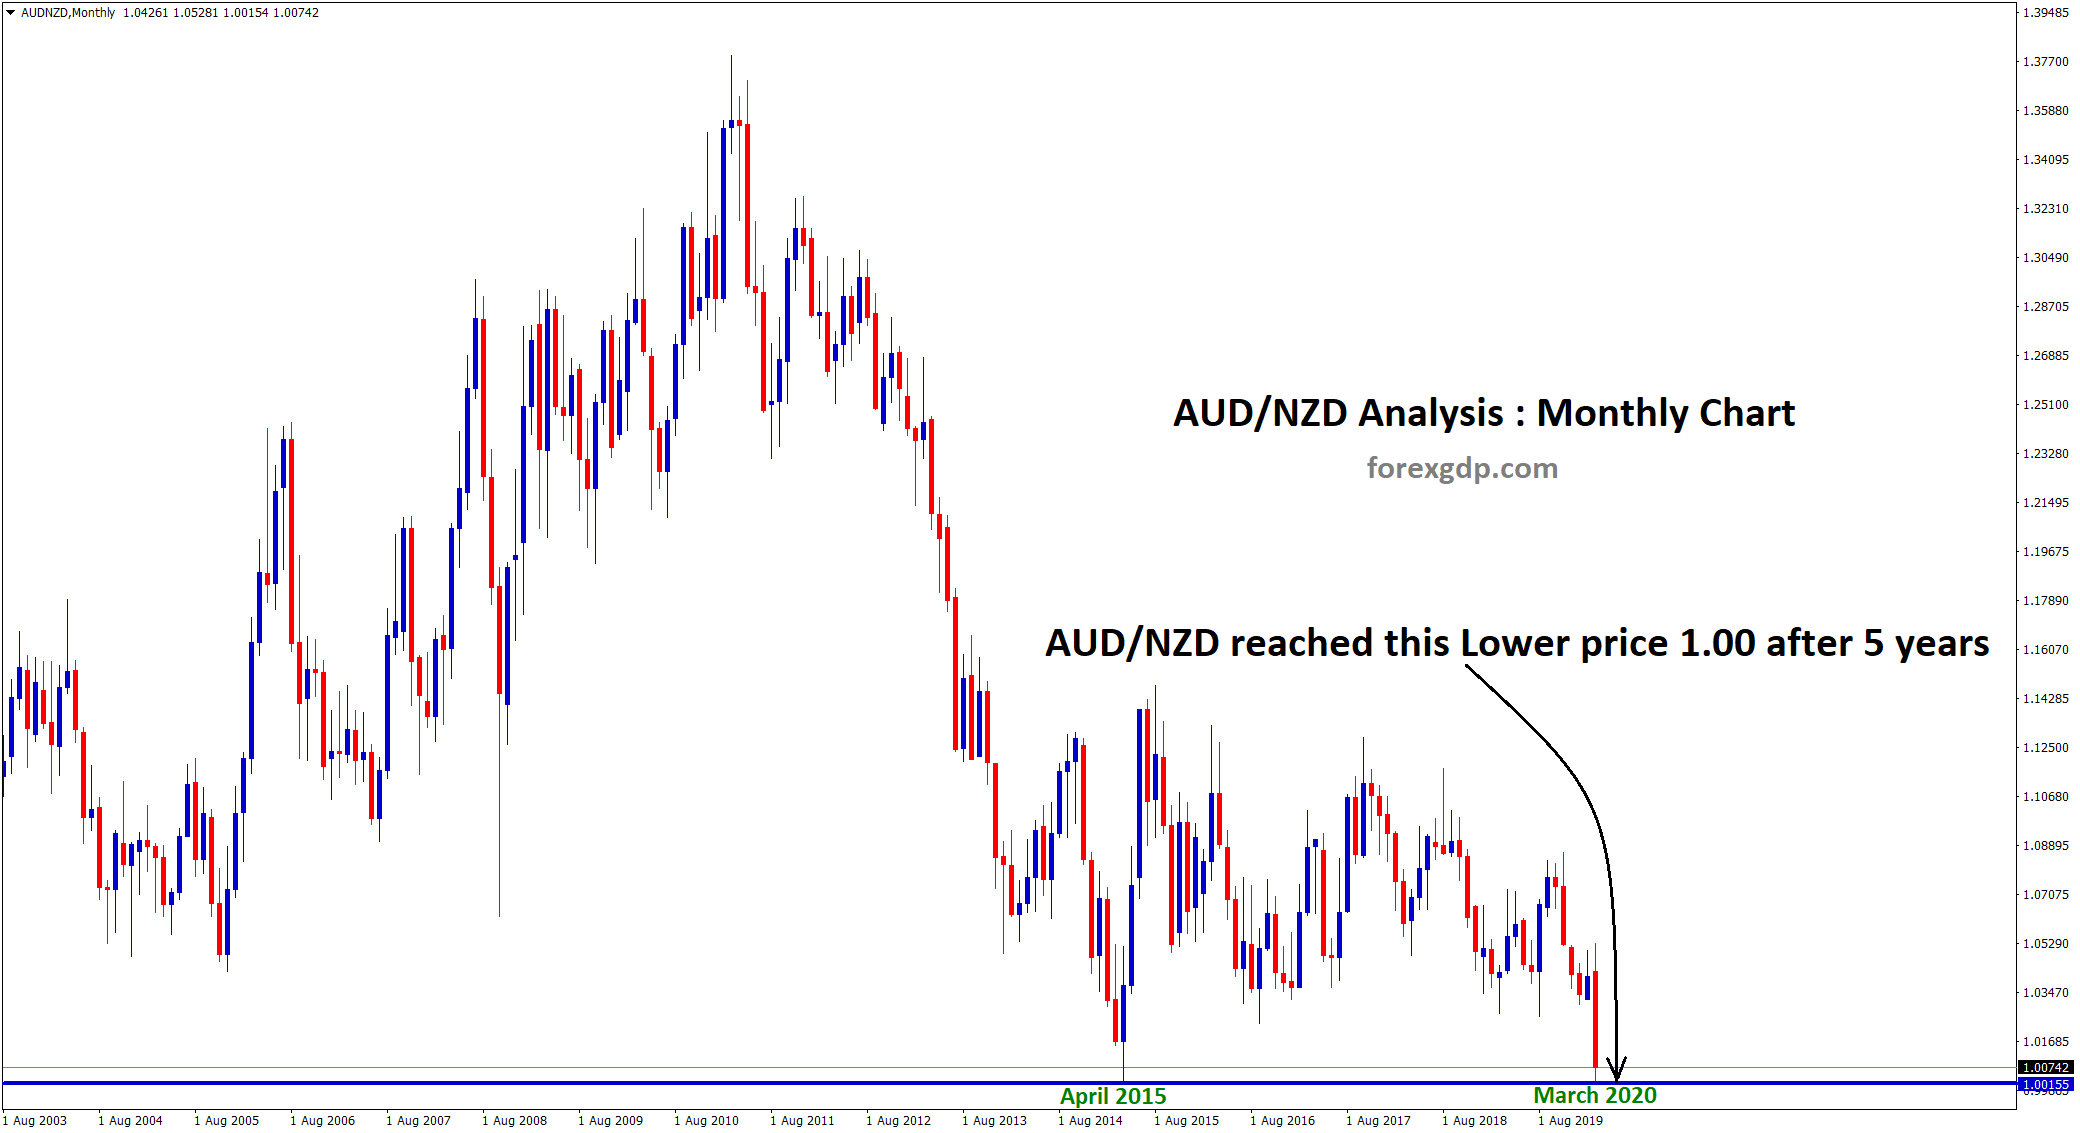 AUD NZD hits 1.00 after 5 years in March 2020